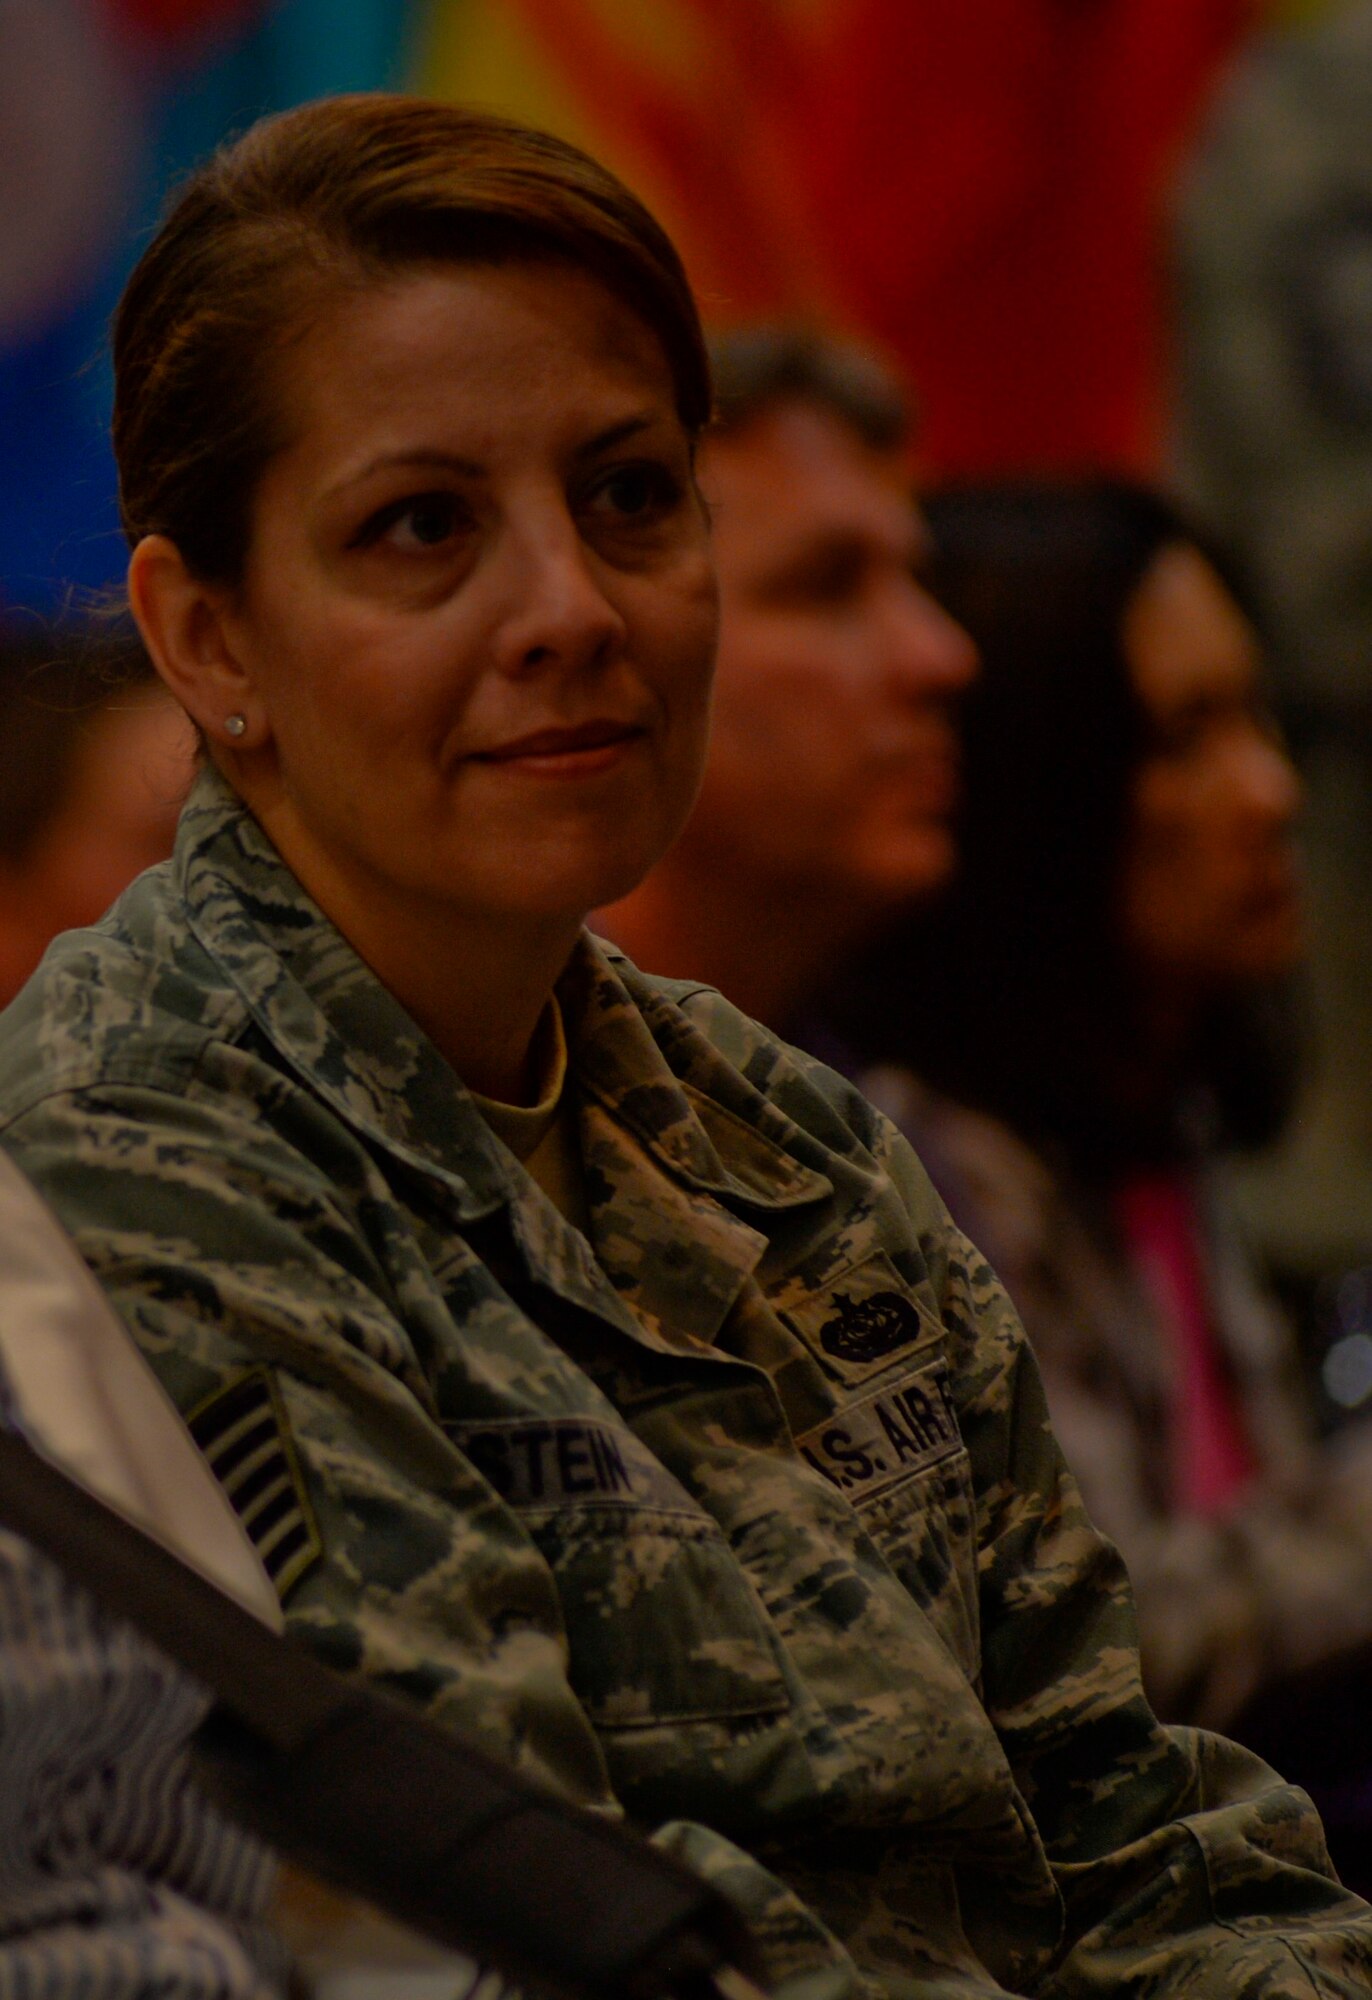 U.S. Air Force Tech. Sgt. Erika Stein, assistant to the 52nd Fighter Wing command chief, listens to a presentation as part of the Diversity Day celebration at Club Eifel at Spangdahlem Air Base, Germany, Aug. 25, 2014. The presentation highlighted the care provided to displaced children who survived the Holocaust, including Stein’s grandfather, Morris. (U.S. Air Force photo by Staff Sgt. Joe W. McFadden/Released)